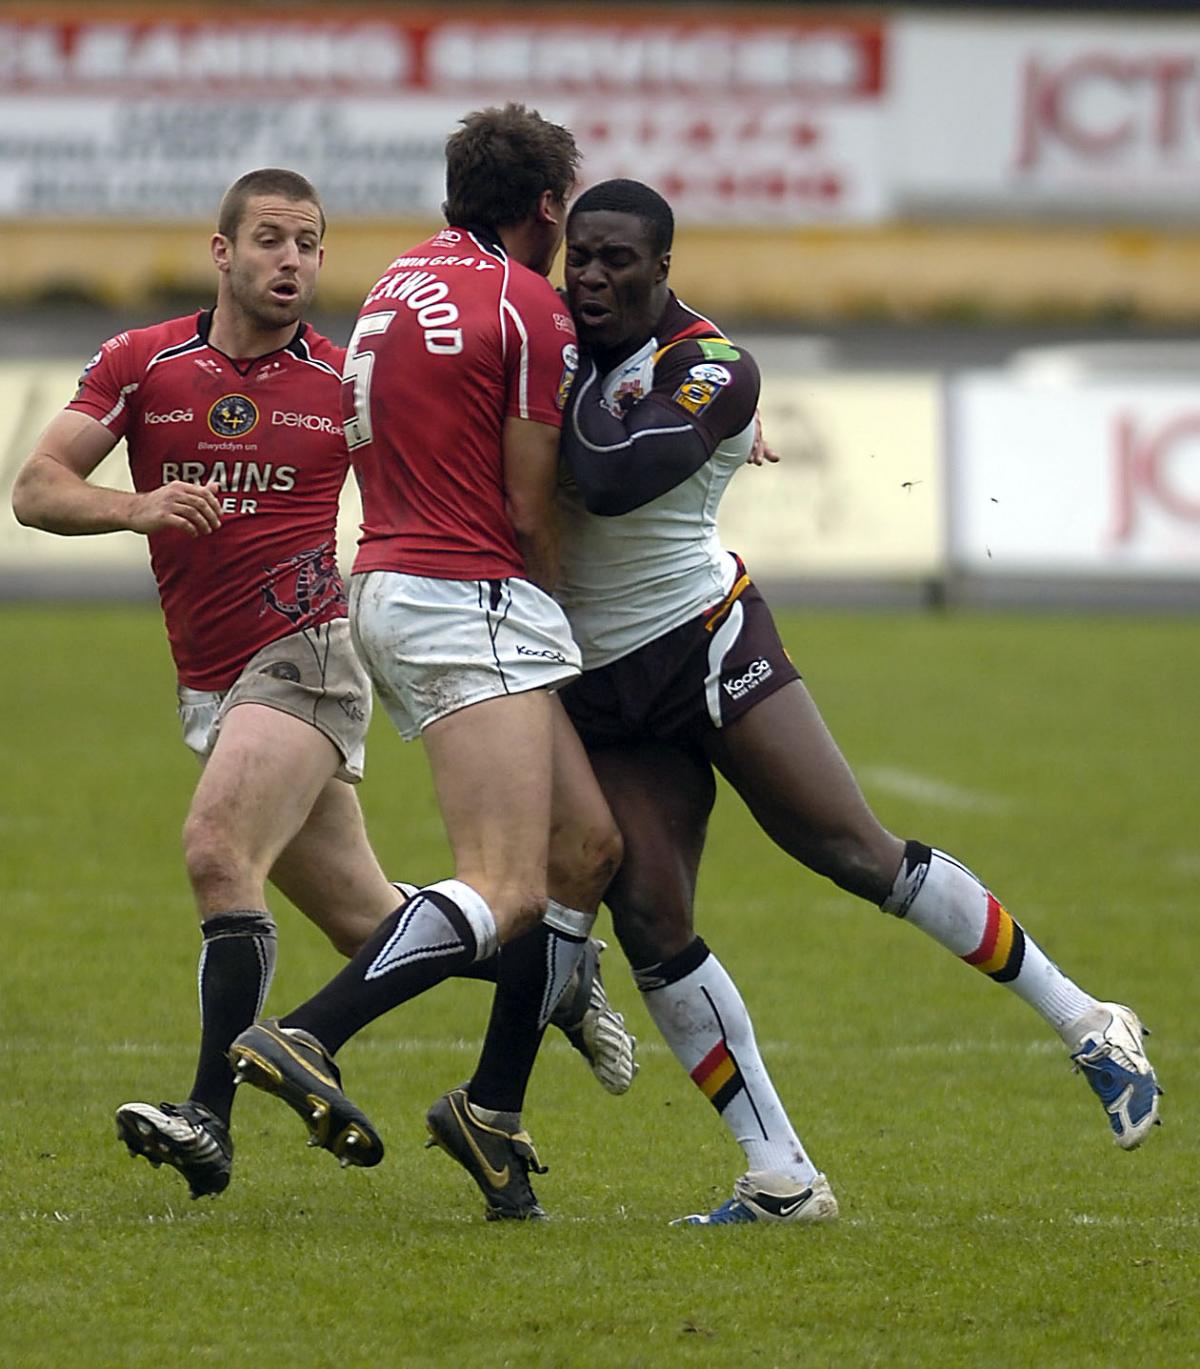 Match pictures from Bulls' game against Celtic Crusaders